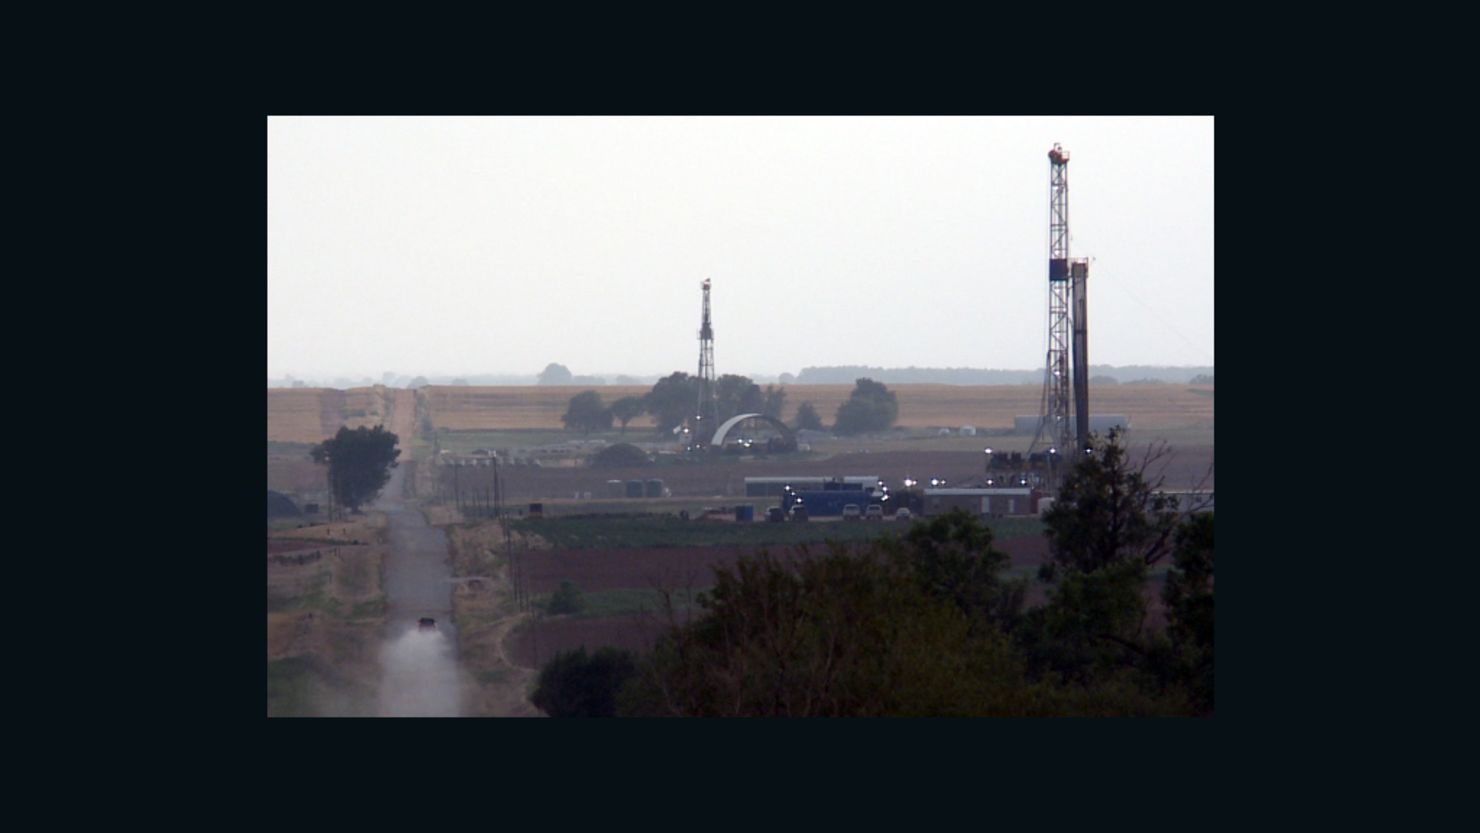 Oil rigs are popping up in the farmlands of Harper County, Kansas, where an oil boom is underway.  